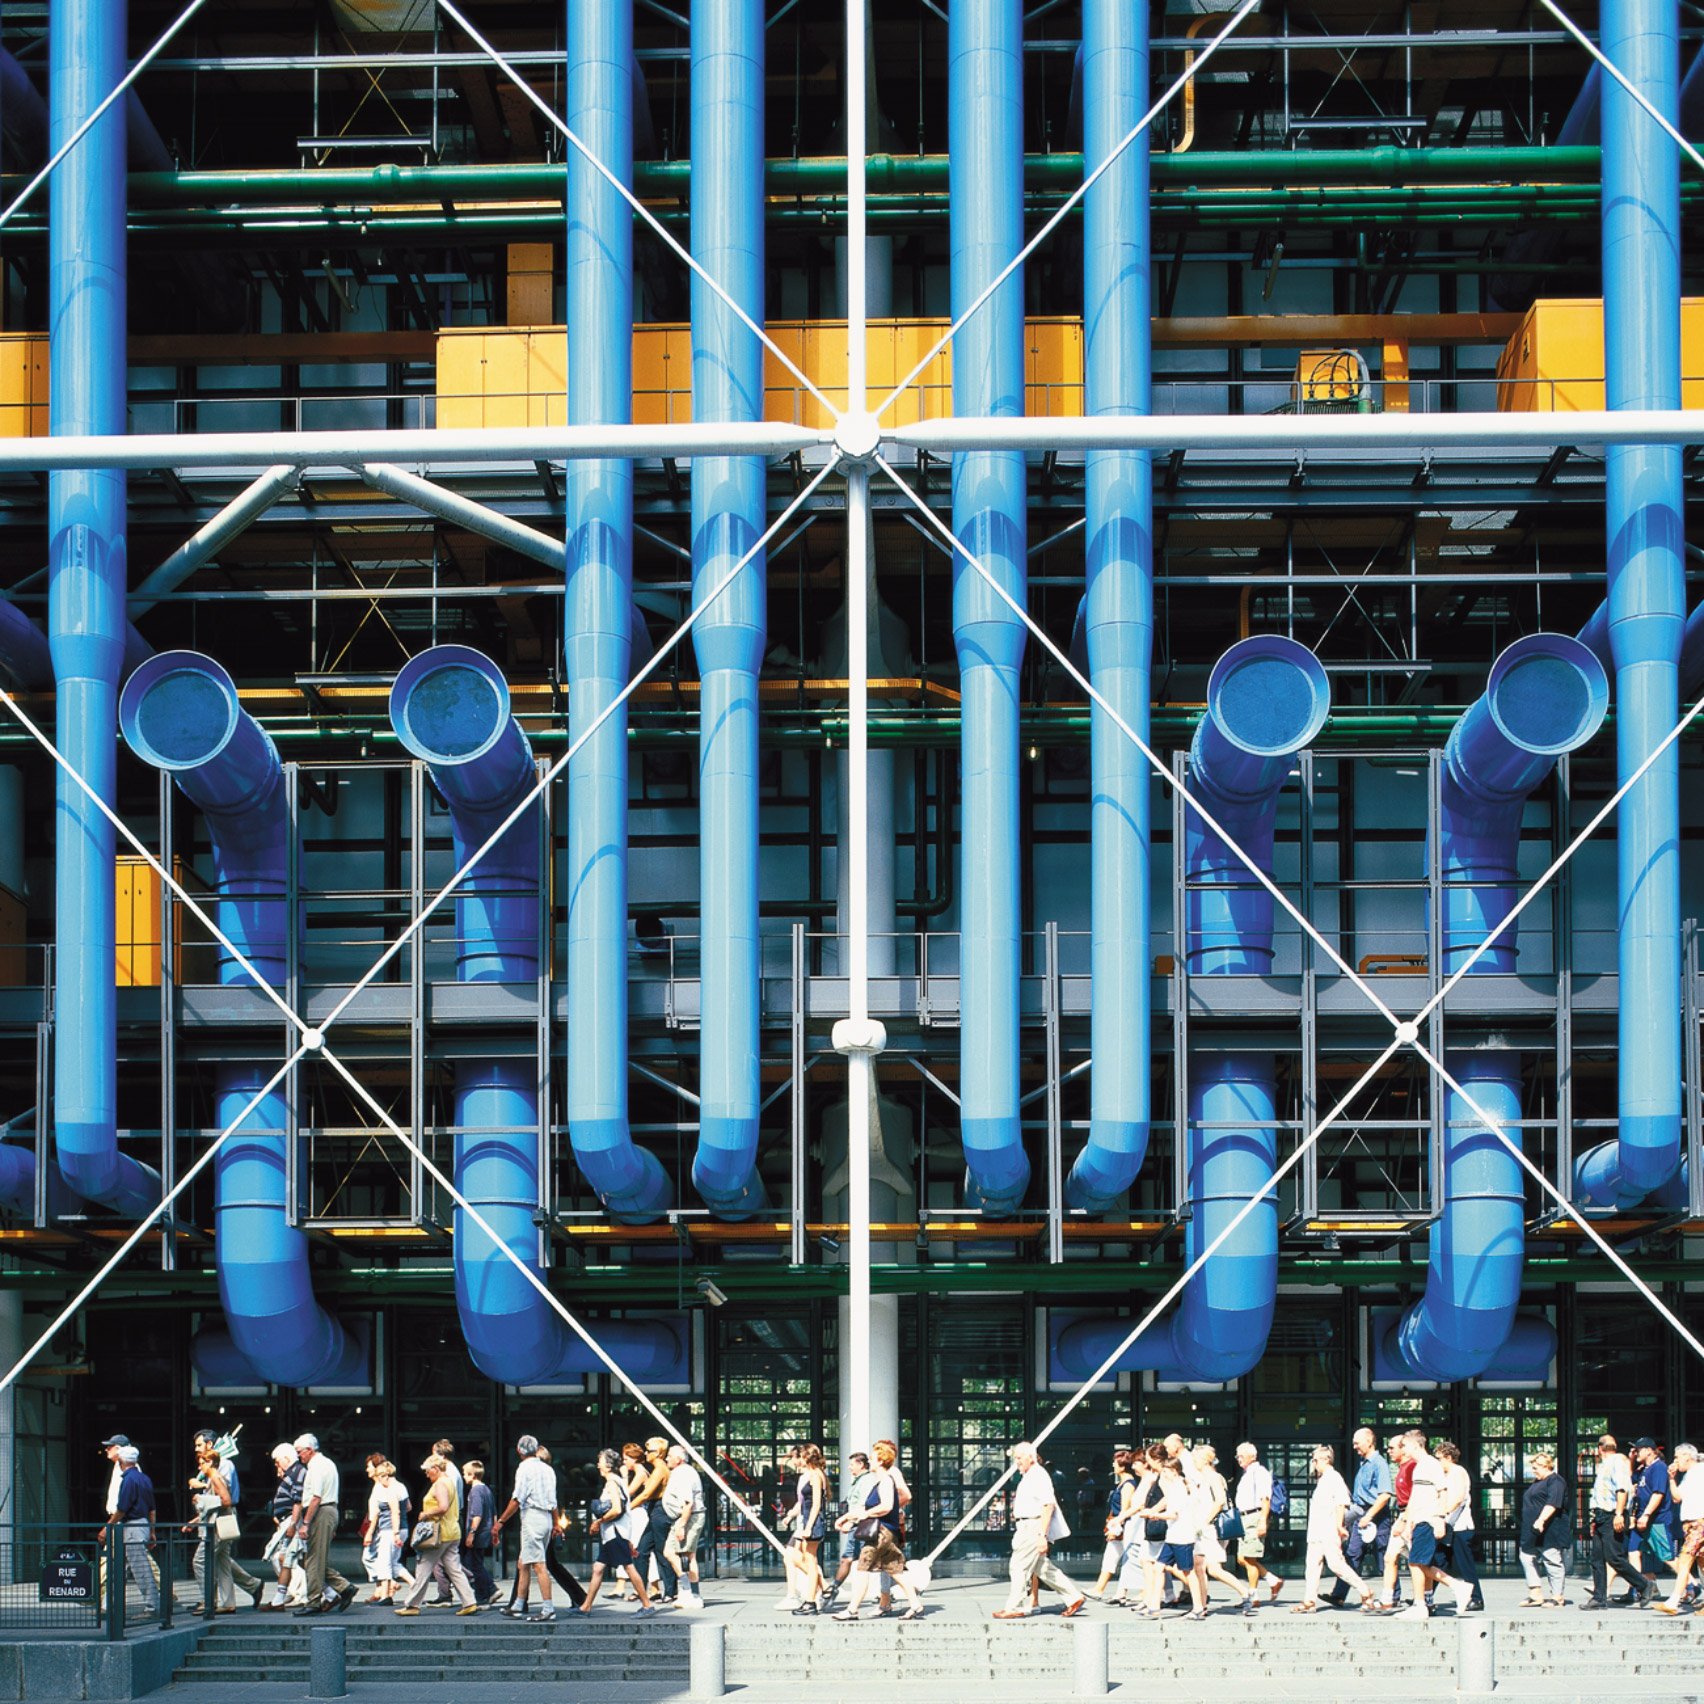 Richard Rogers top 10 architecture projects: Centre Pompidou by Richard Rogers and Renzo Piano